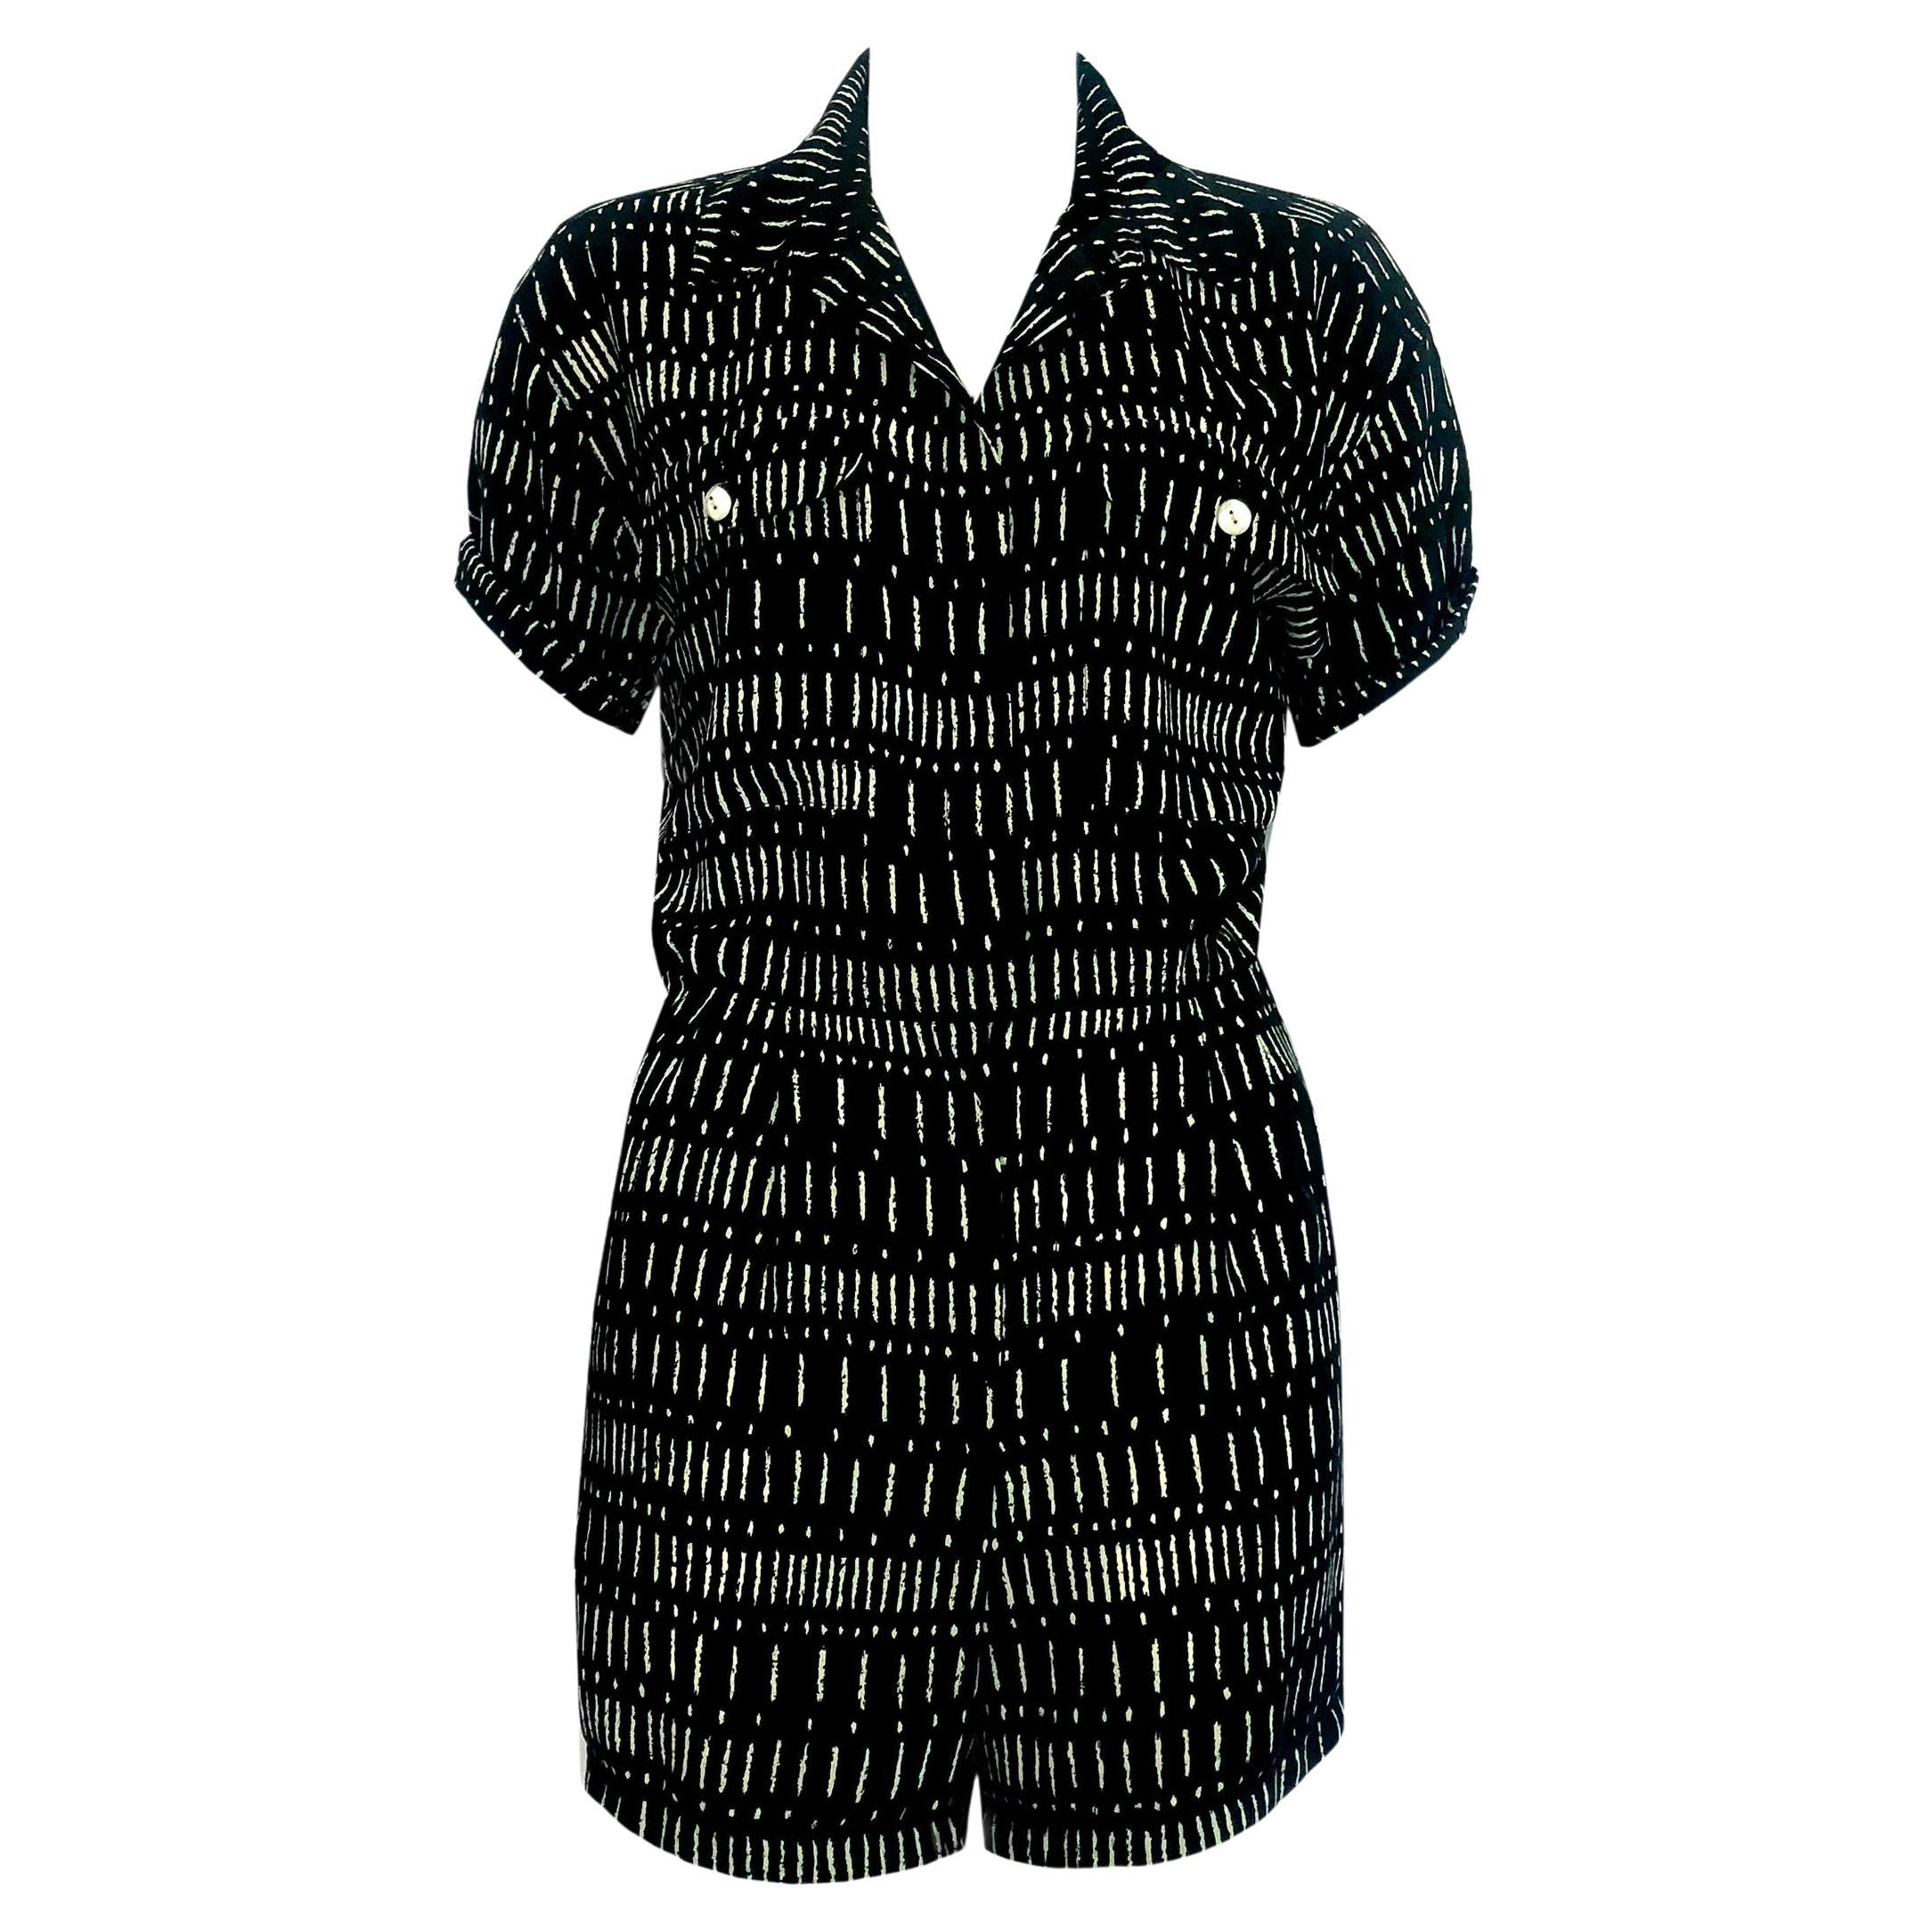 1980s Vintage Playsuit - Black & White Abstract Print - Pockets Details